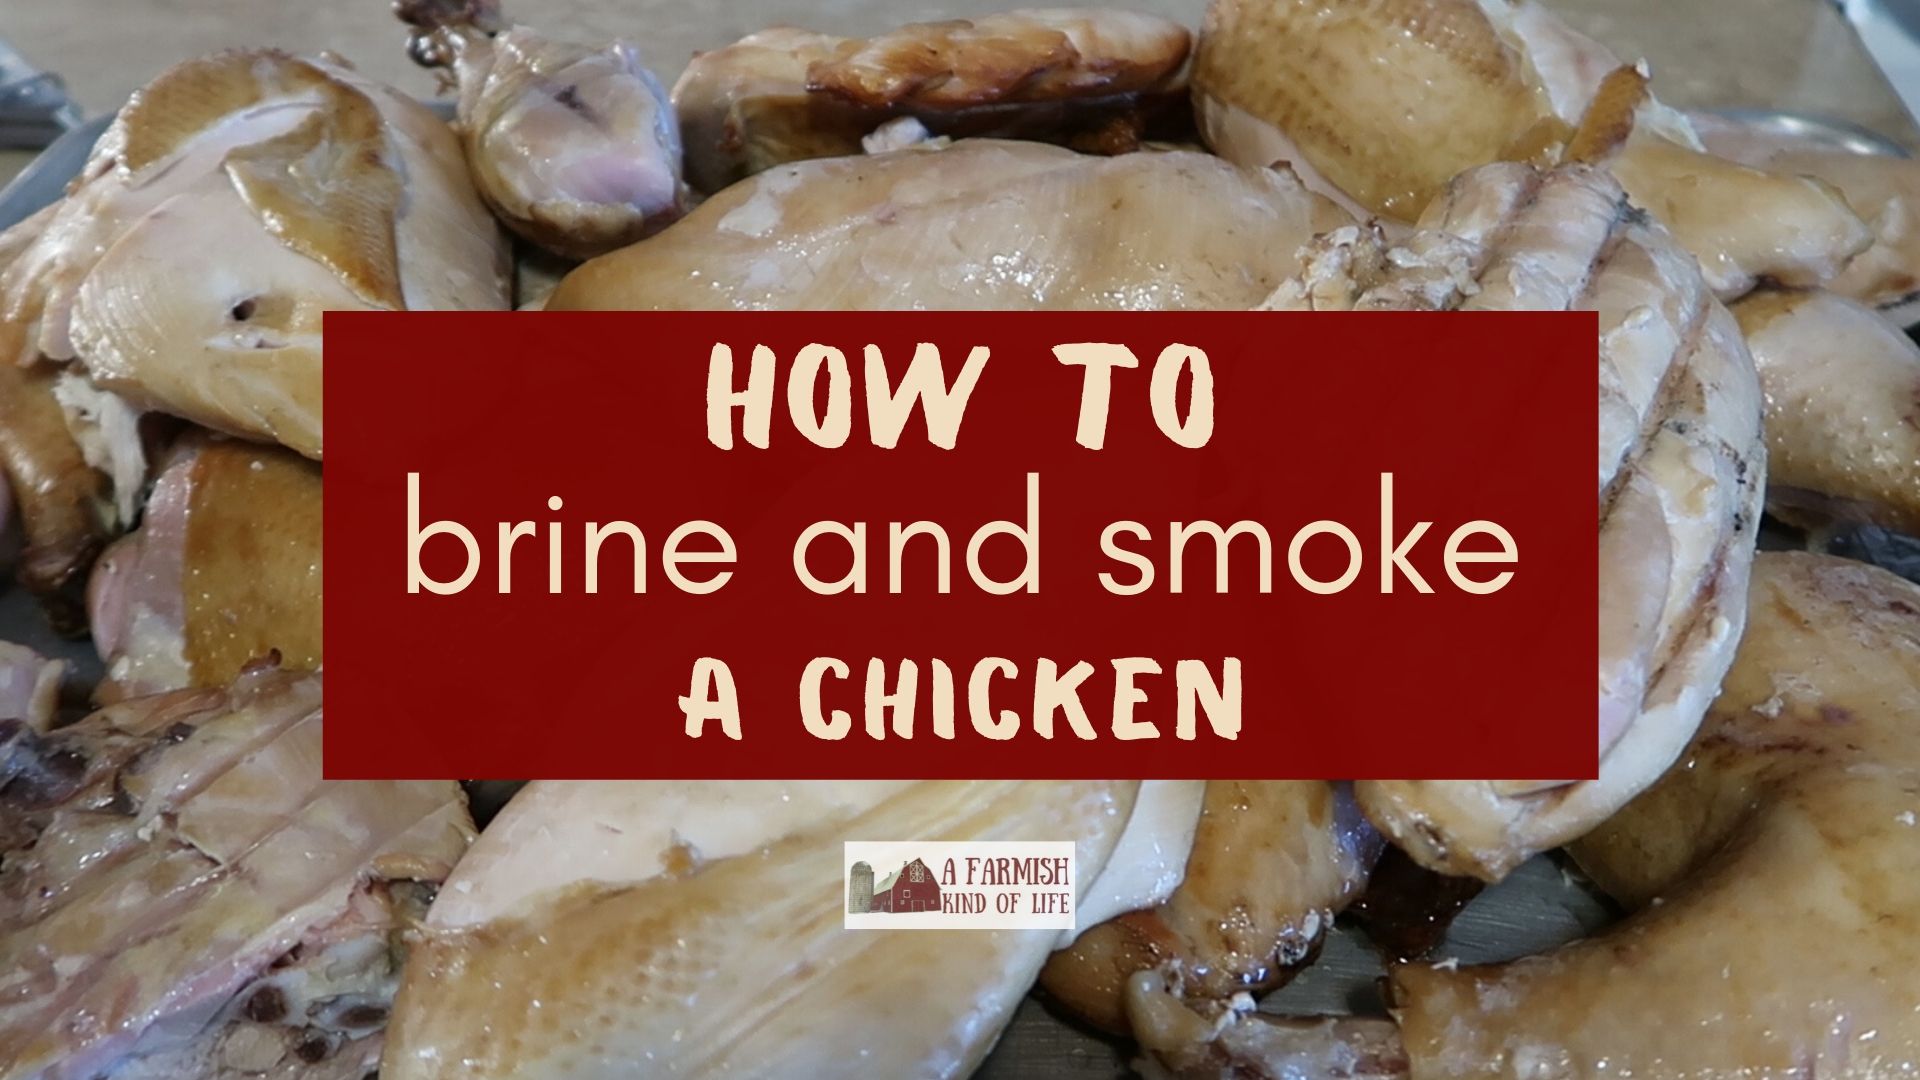 How to Brine and Smoke a Chicken